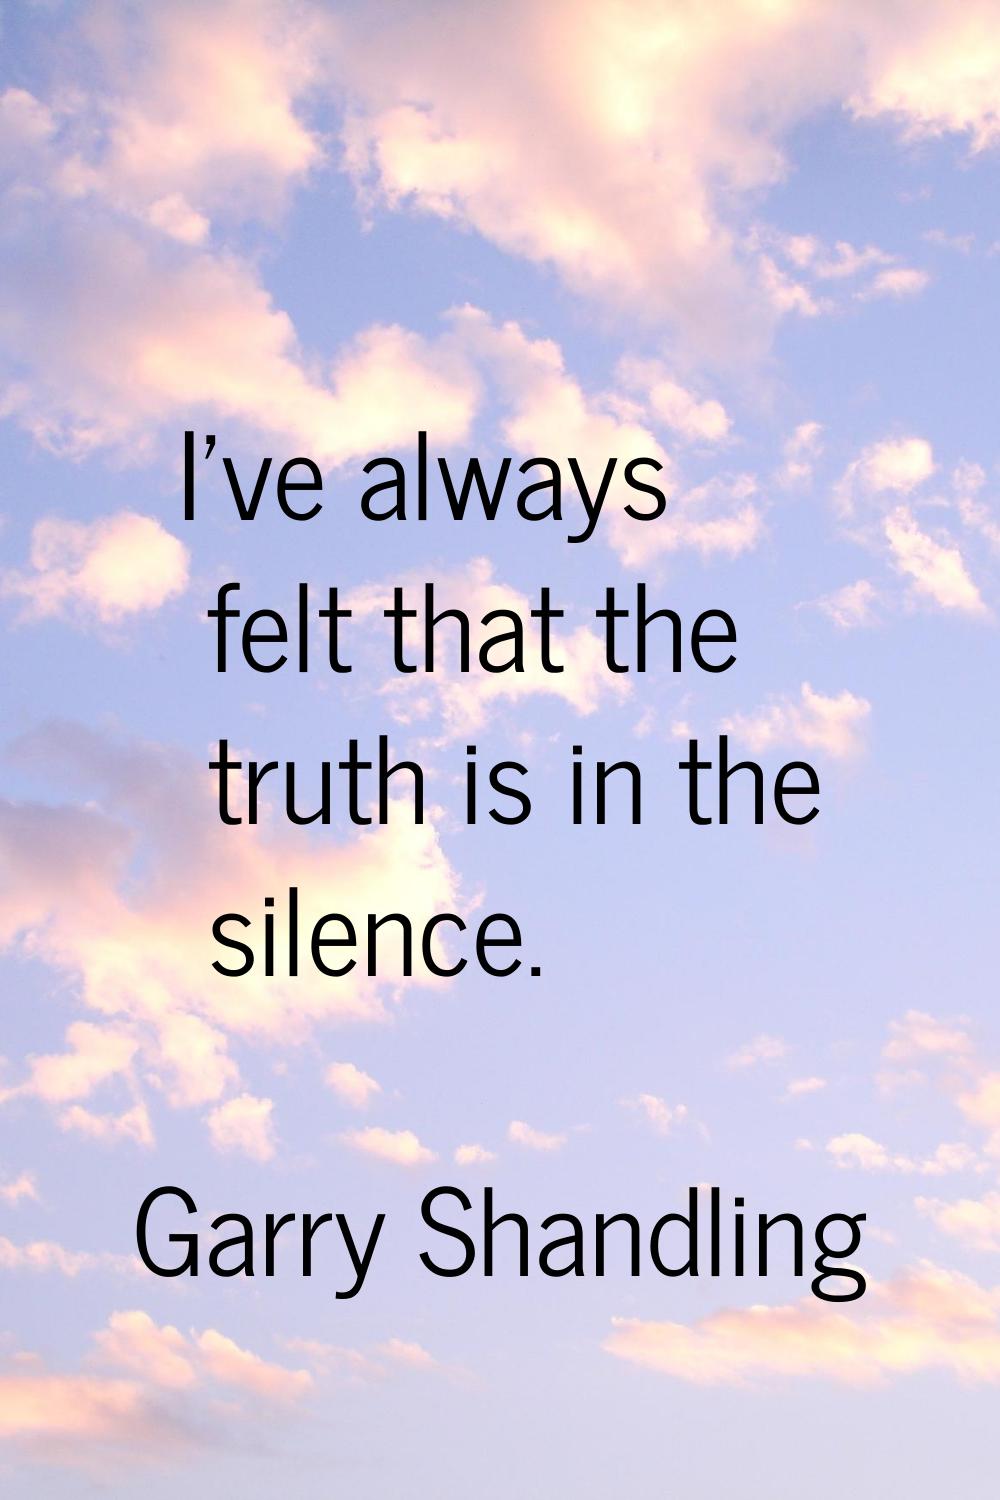 I've always felt that the truth is in the silence.